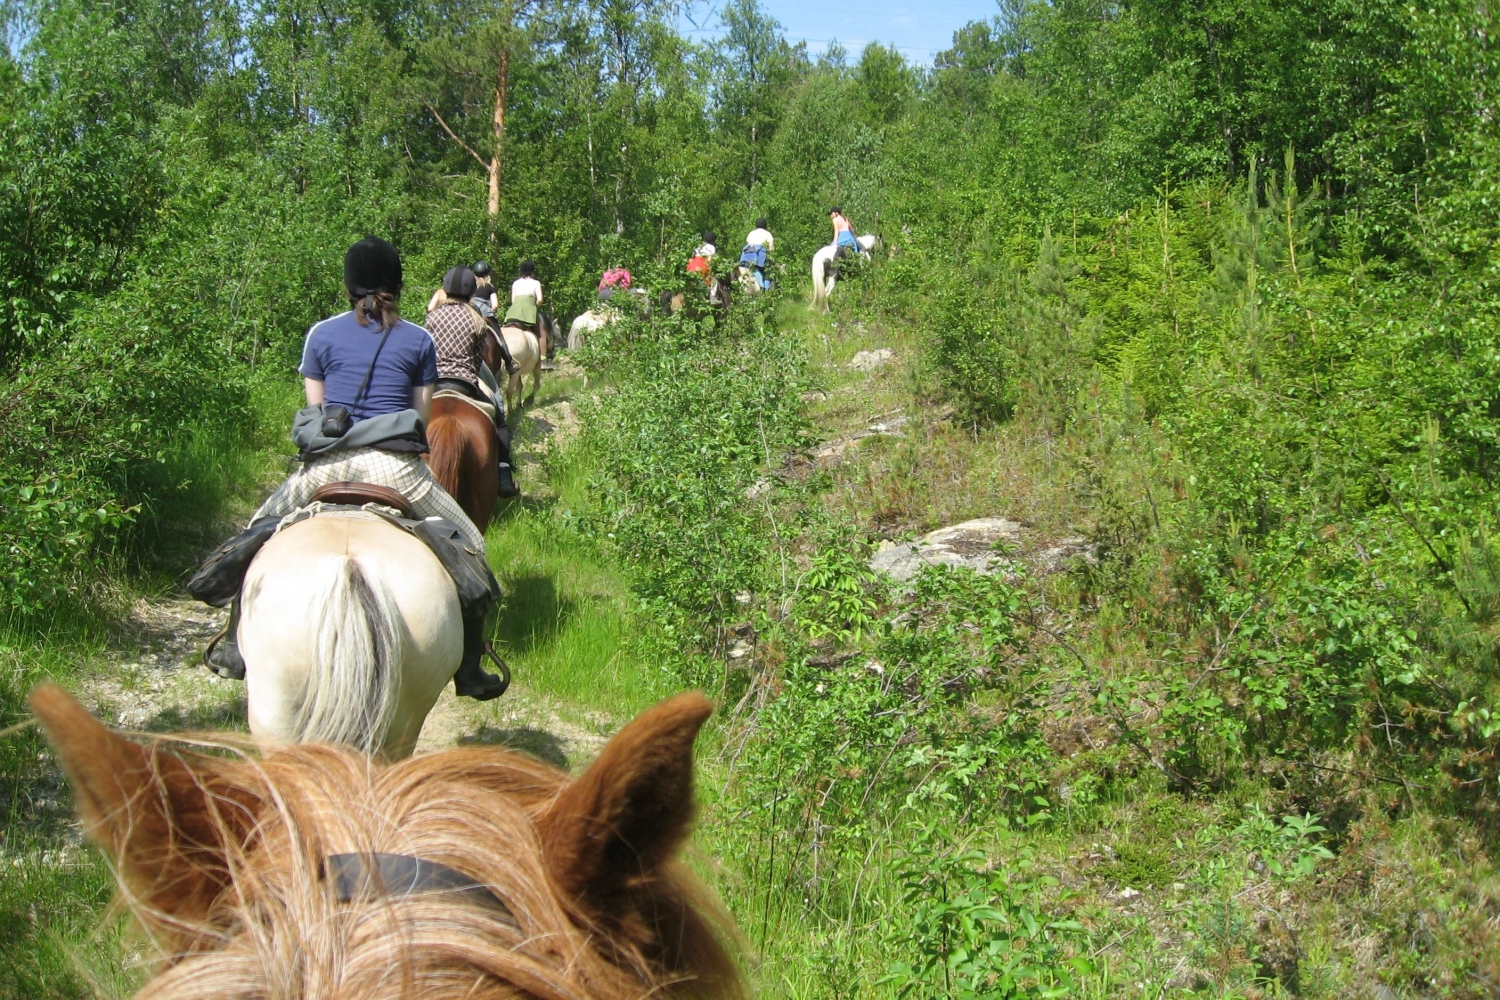 horseback riding in the woods